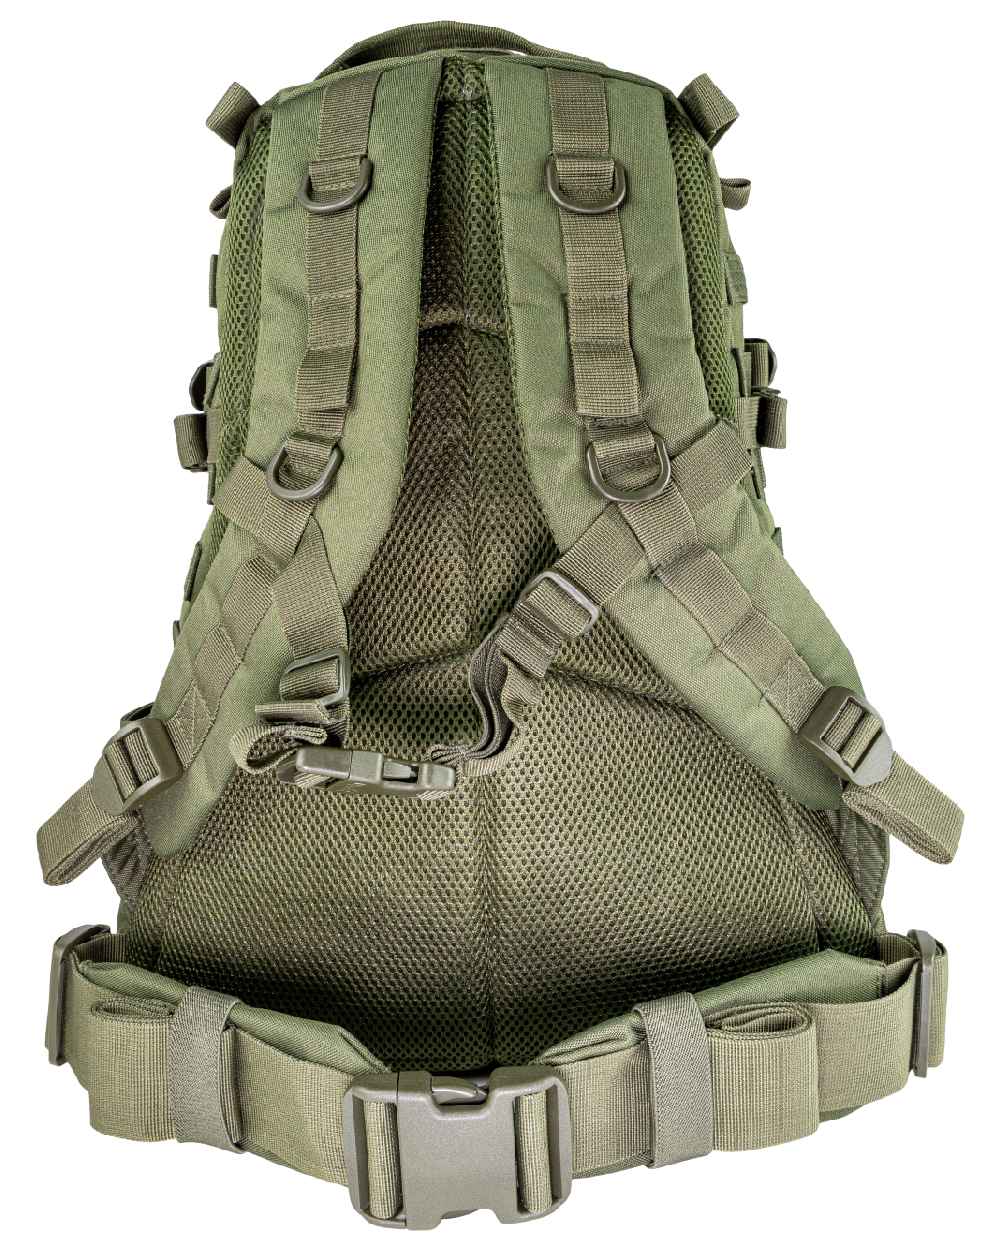 Viper Special Ops Pack in Green 